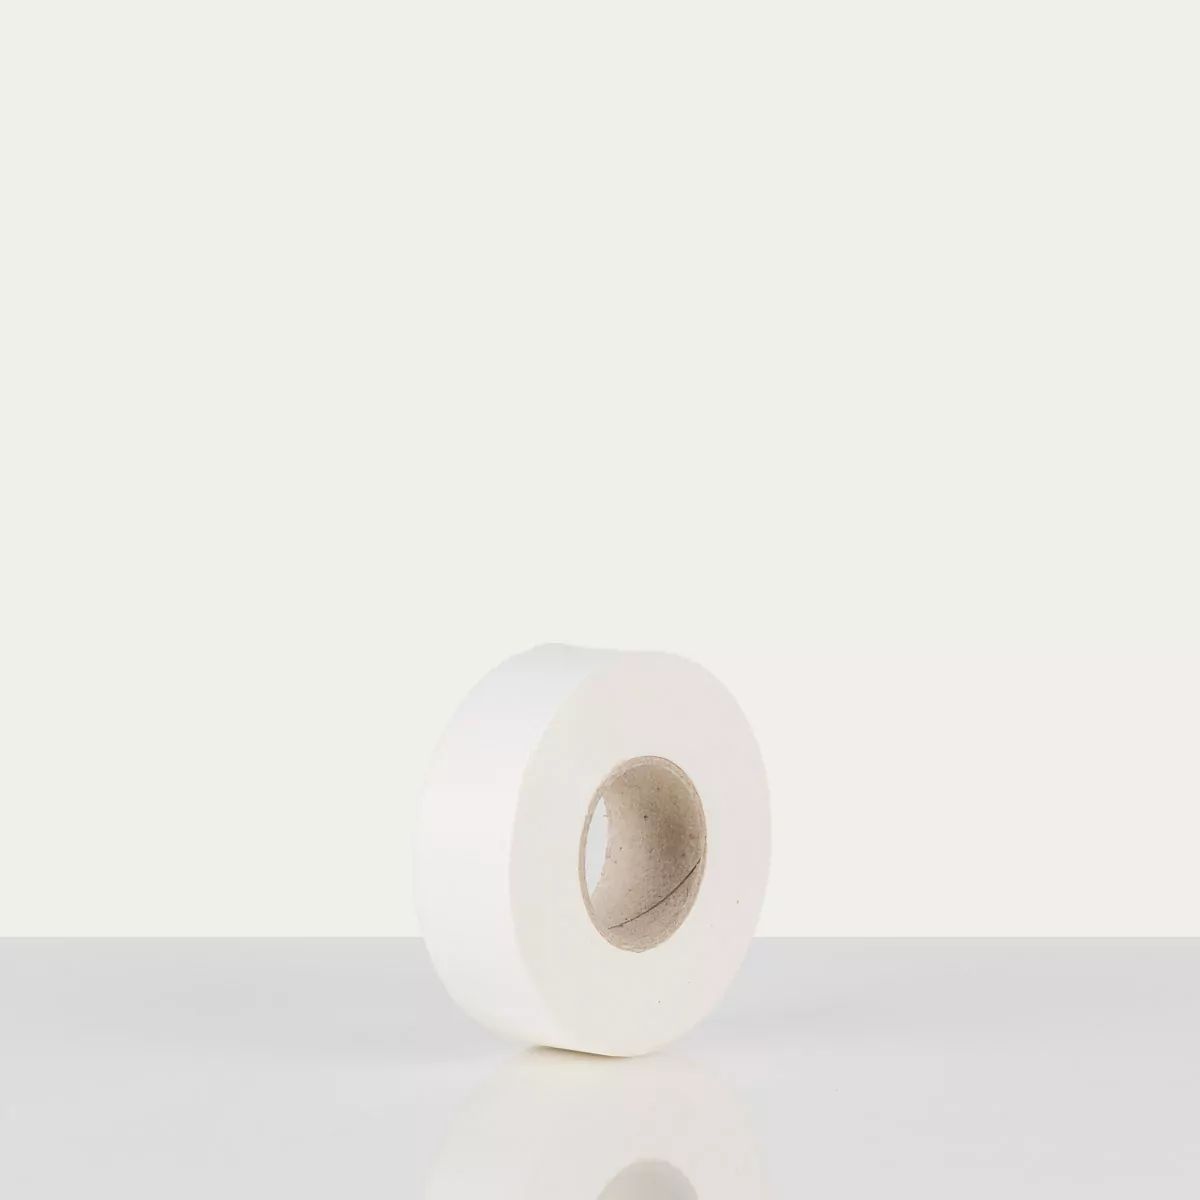 Paper tape white with starch-based gumming 2.5cmX48m